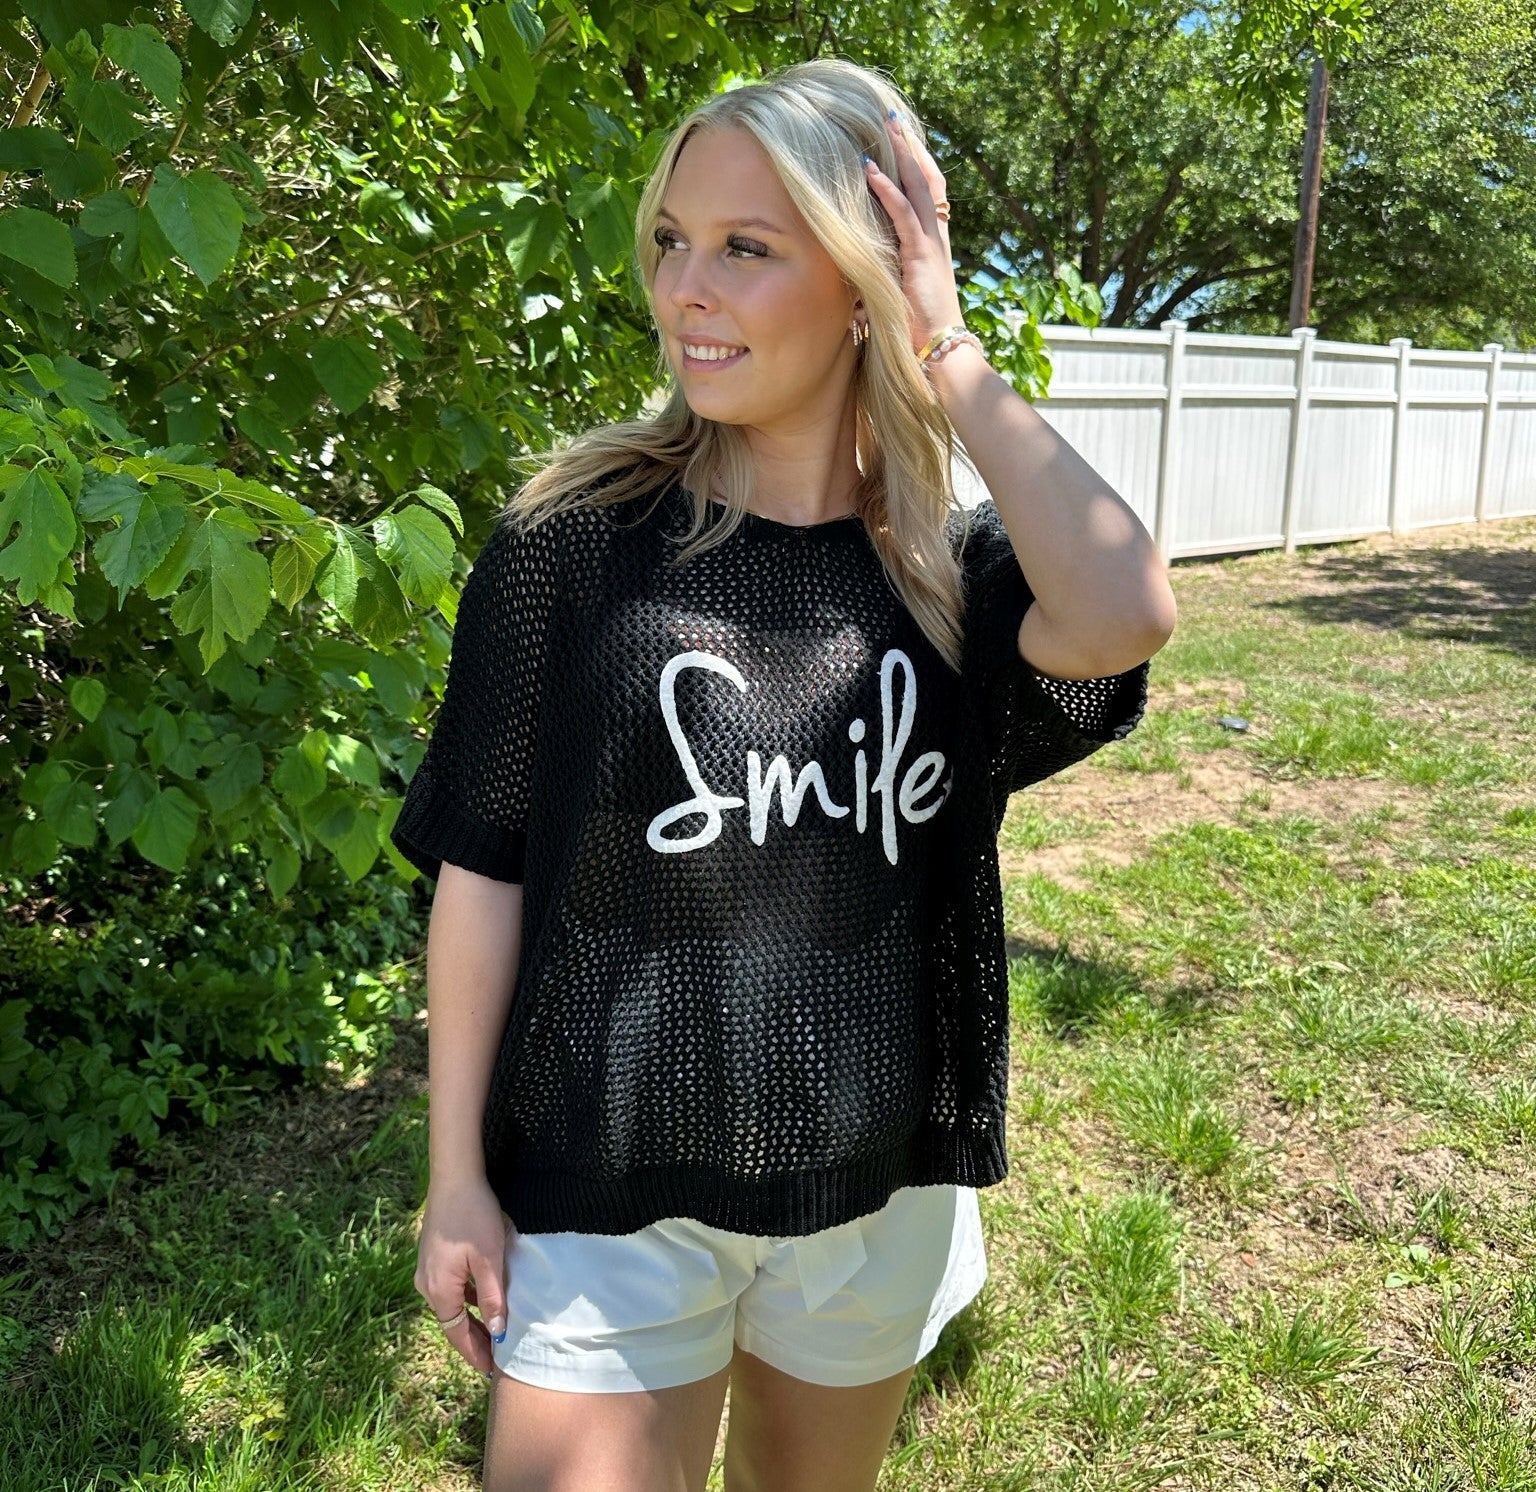 One size fits all cotton knit "smile" shirt Blouse New York Life Black  